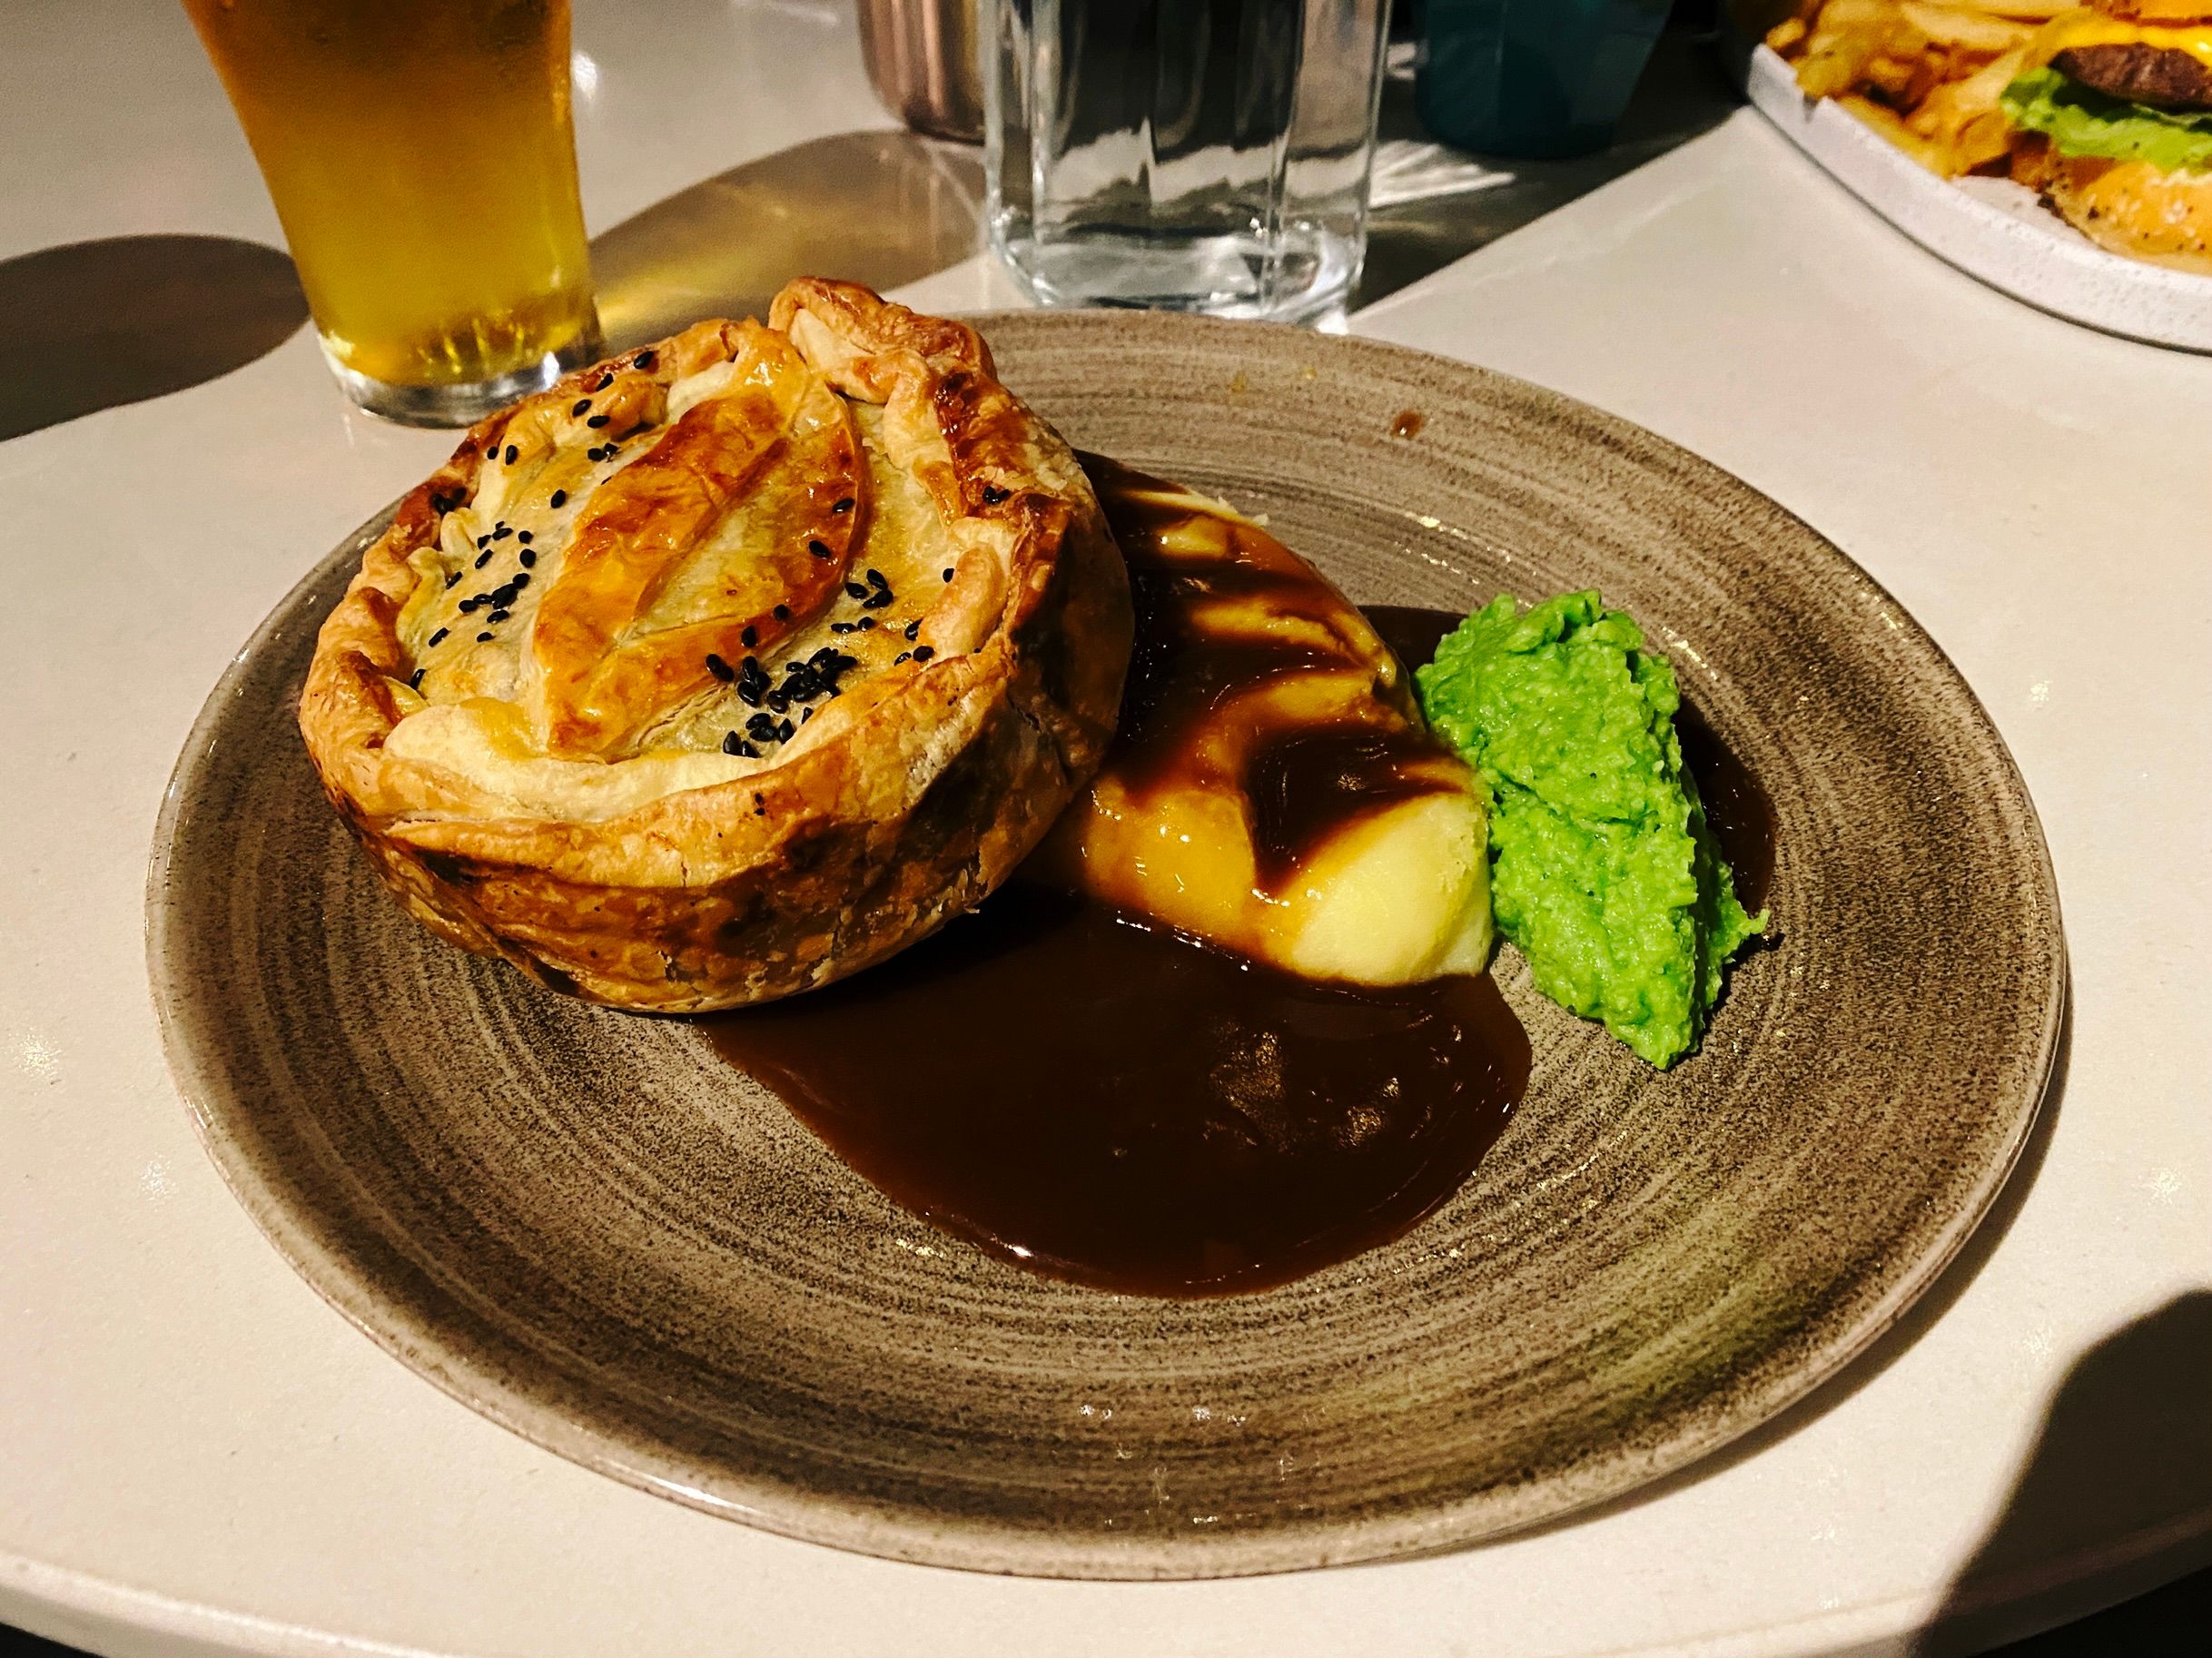 A photo of a pie sitting on a plate along with mash that's covered in gravy and a dollop of mushy peas.